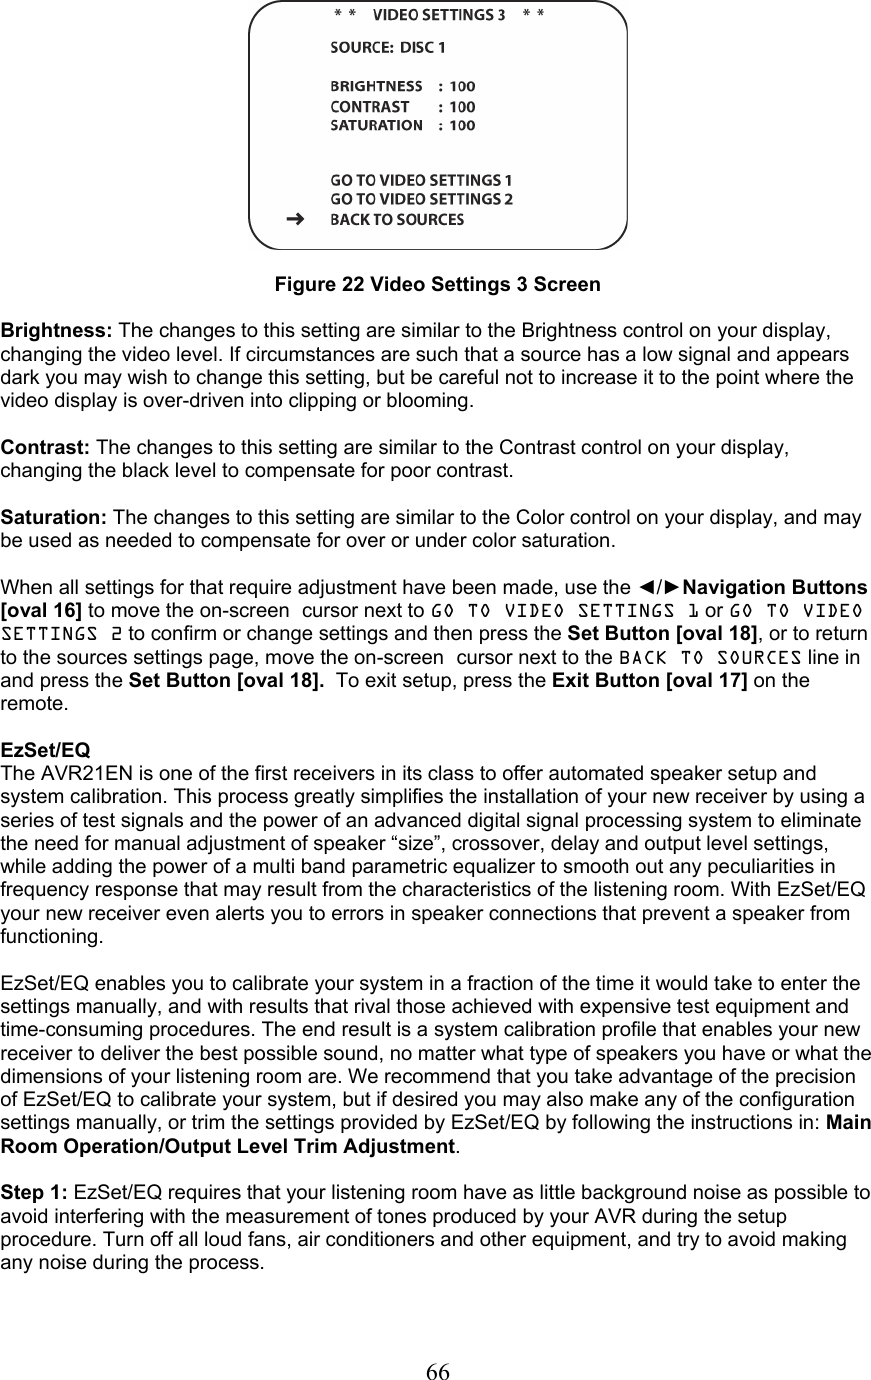  66  Figure 22 Video Settings 3 Screen  Brightness: The changes to this setting are similar to the Brightness control on your display, changing the video level. If circumstances are such that a source has a low signal and appears dark you may wish to change this setting, but be careful not to increase it to the point where the video display is over-driven into clipping or blooming.  Contrast: The changes to this setting are similar to the Contrast control on your display, changing the black level to compensate for poor contrast.  Saturation: The changes to this setting are similar to the Color control on your display, and may be used as needed to compensate for over or under color saturation.  When all settings for that require adjustment have been made, use the ◄/►Navigation Buttons [oval 16] to move the on-screen cursor next to GO TO VIDEO SETTINGS 1 or GO TO VIDEO SETTINGS 2 to confirm or change settings and then press the Set Button [oval 18], or to return to the sources settings page, move the on-screen cursor next to the BACK TO SOURCES line in and press the Set Button [oval 18].  To exit setup, press the Exit Button [oval 17] on the remote.  EzSet/EQ The AVR21EN is one of the first receivers in its class to offer automated speaker setup and system calibration. This process greatly simplifies the installation of your new receiver by using a series of test signals and the power of an advanced digital signal processing system to eliminate the need for manual adjustment of speaker “size”, crossover, delay and output level settings, while adding the power of a multi band parametric equalizer to smooth out any peculiarities in frequency response that may result from the characteristics of the listening room. With EzSet/EQ your new receiver even alerts you to errors in speaker connections that prevent a speaker from functioning.  EzSet/EQ enables you to calibrate your system in a fraction of the time it would take to enter the settings manually, and with results that rival those achieved with expensive test equipment and time-consuming procedures. The end result is a system calibration profile that enables your new receiver to deliver the best possible sound, no matter what type of speakers you have or what the dimensions of your listening room are. We recommend that you take advantage of the precision of EzSet/EQ to calibrate your system, but if desired you may also make any of the configuration settings manually, or trim the settings provided by EzSet/EQ by following the instructions in: Main Room Operation/Output Level Trim Adjustment.  Step 1: EzSet/EQ requires that your listening room have as little background noise as possible to avoid interfering with the measurement of tones produced by your AVR during the setup procedure. Turn off all loud fans, air conditioners and other equipment, and try to avoid making any noise during the process.  